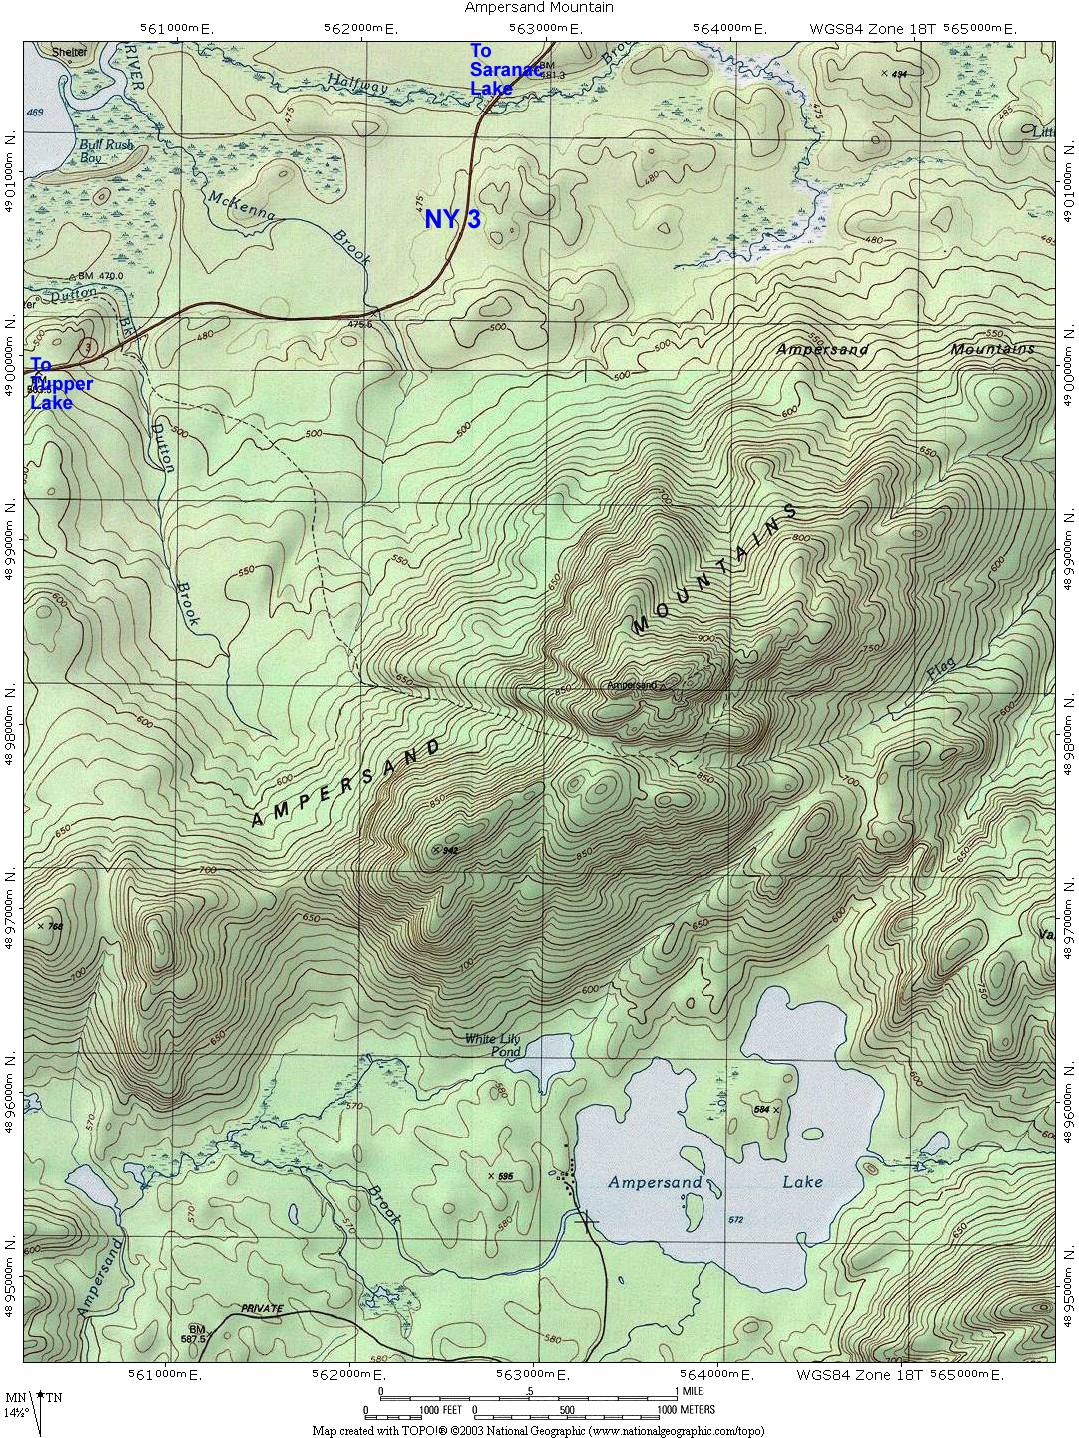 Ampersand Mountain Topographic Map